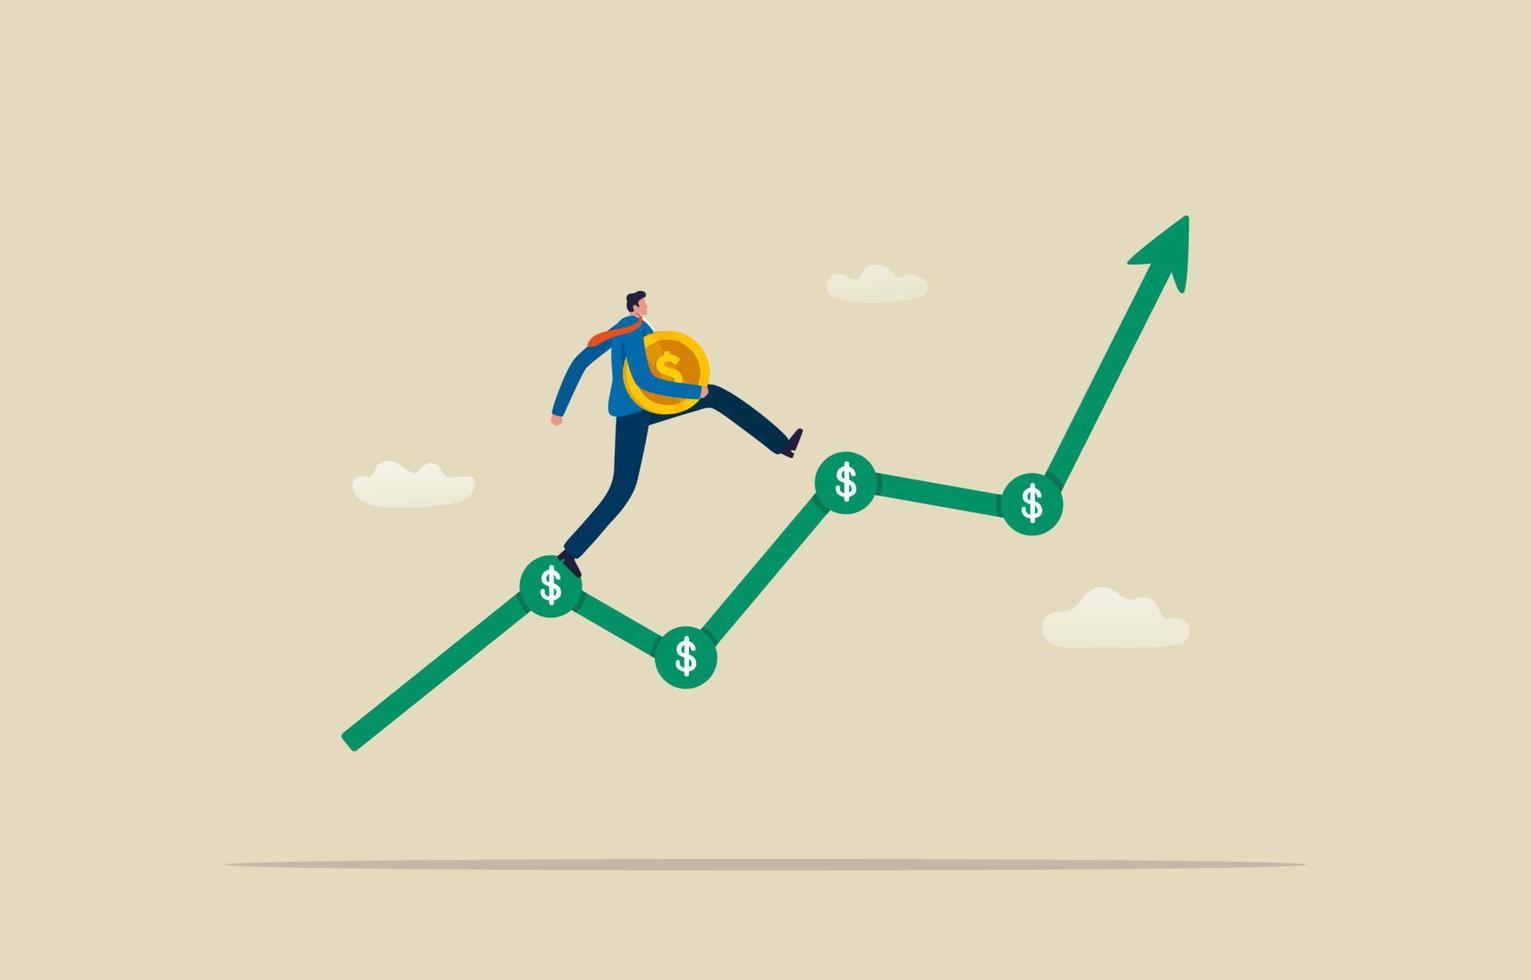 Profit and Business Growth. investment growth or earning and profit rising up. Businessman investor holding gold coins walking up on rising graph. Illustration vector